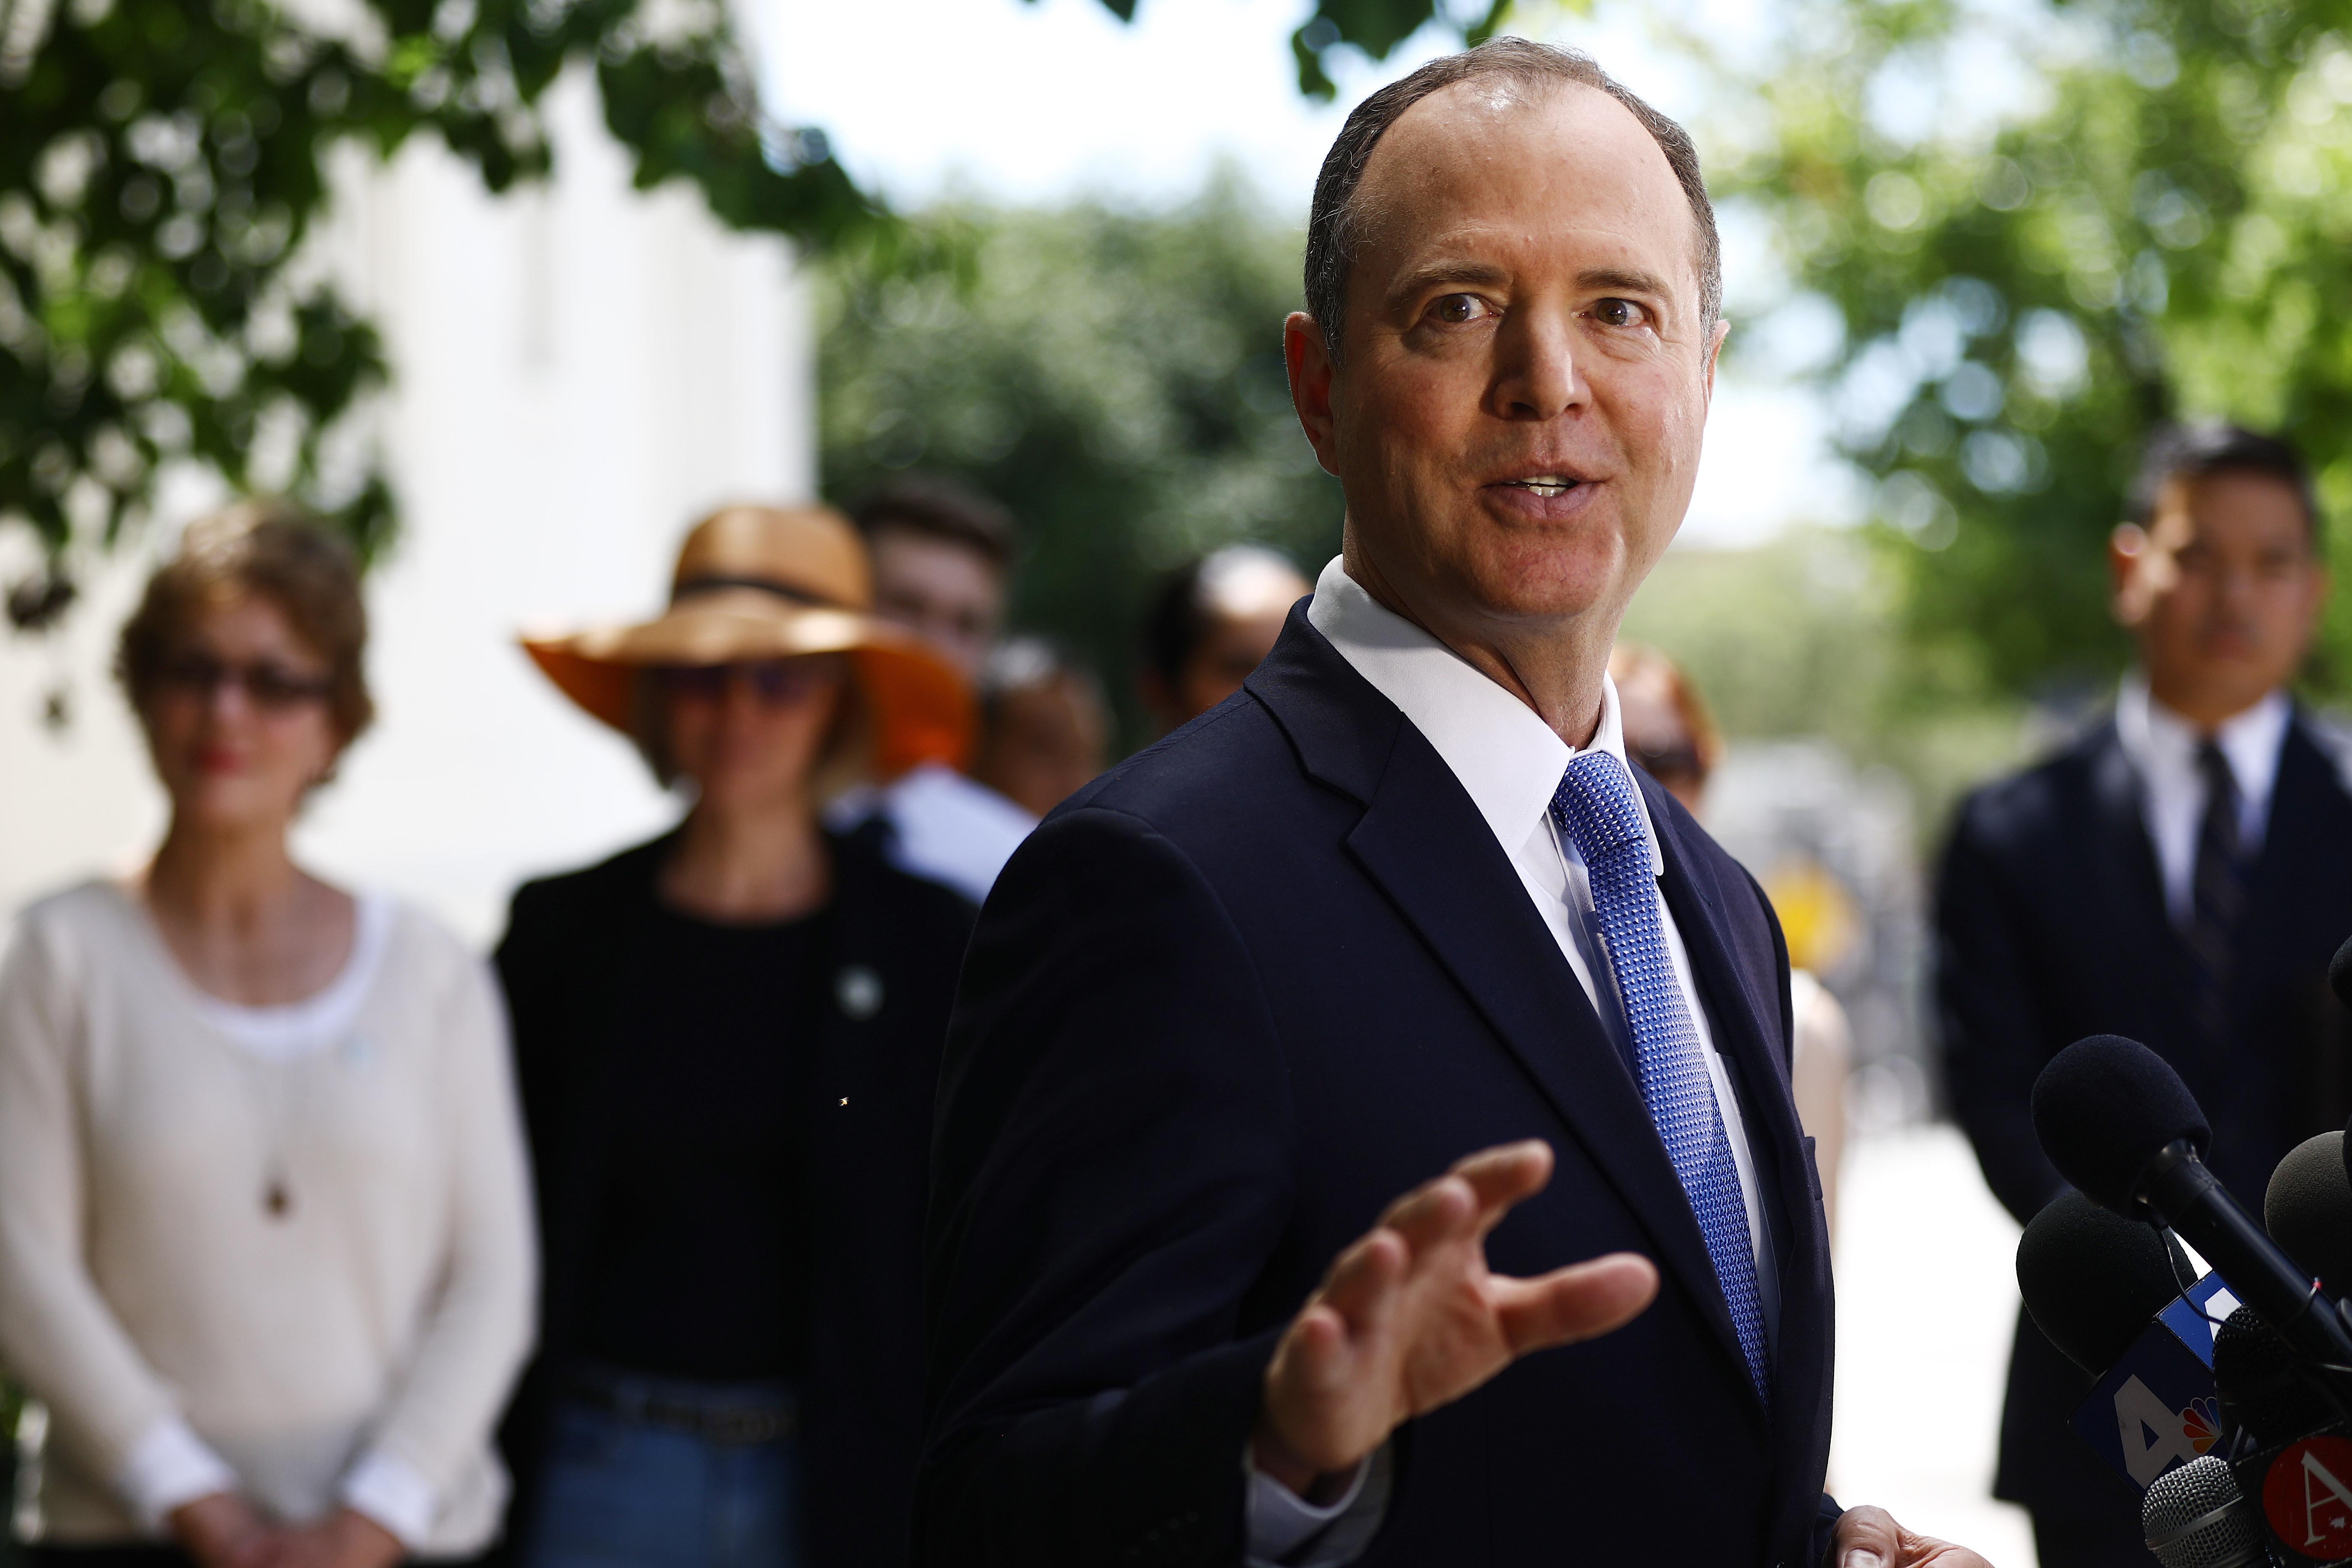 Chairman of the House Intelligence Committee Adam Schiff speaks at a press conference on April 18, 2019 in Burbank, California.